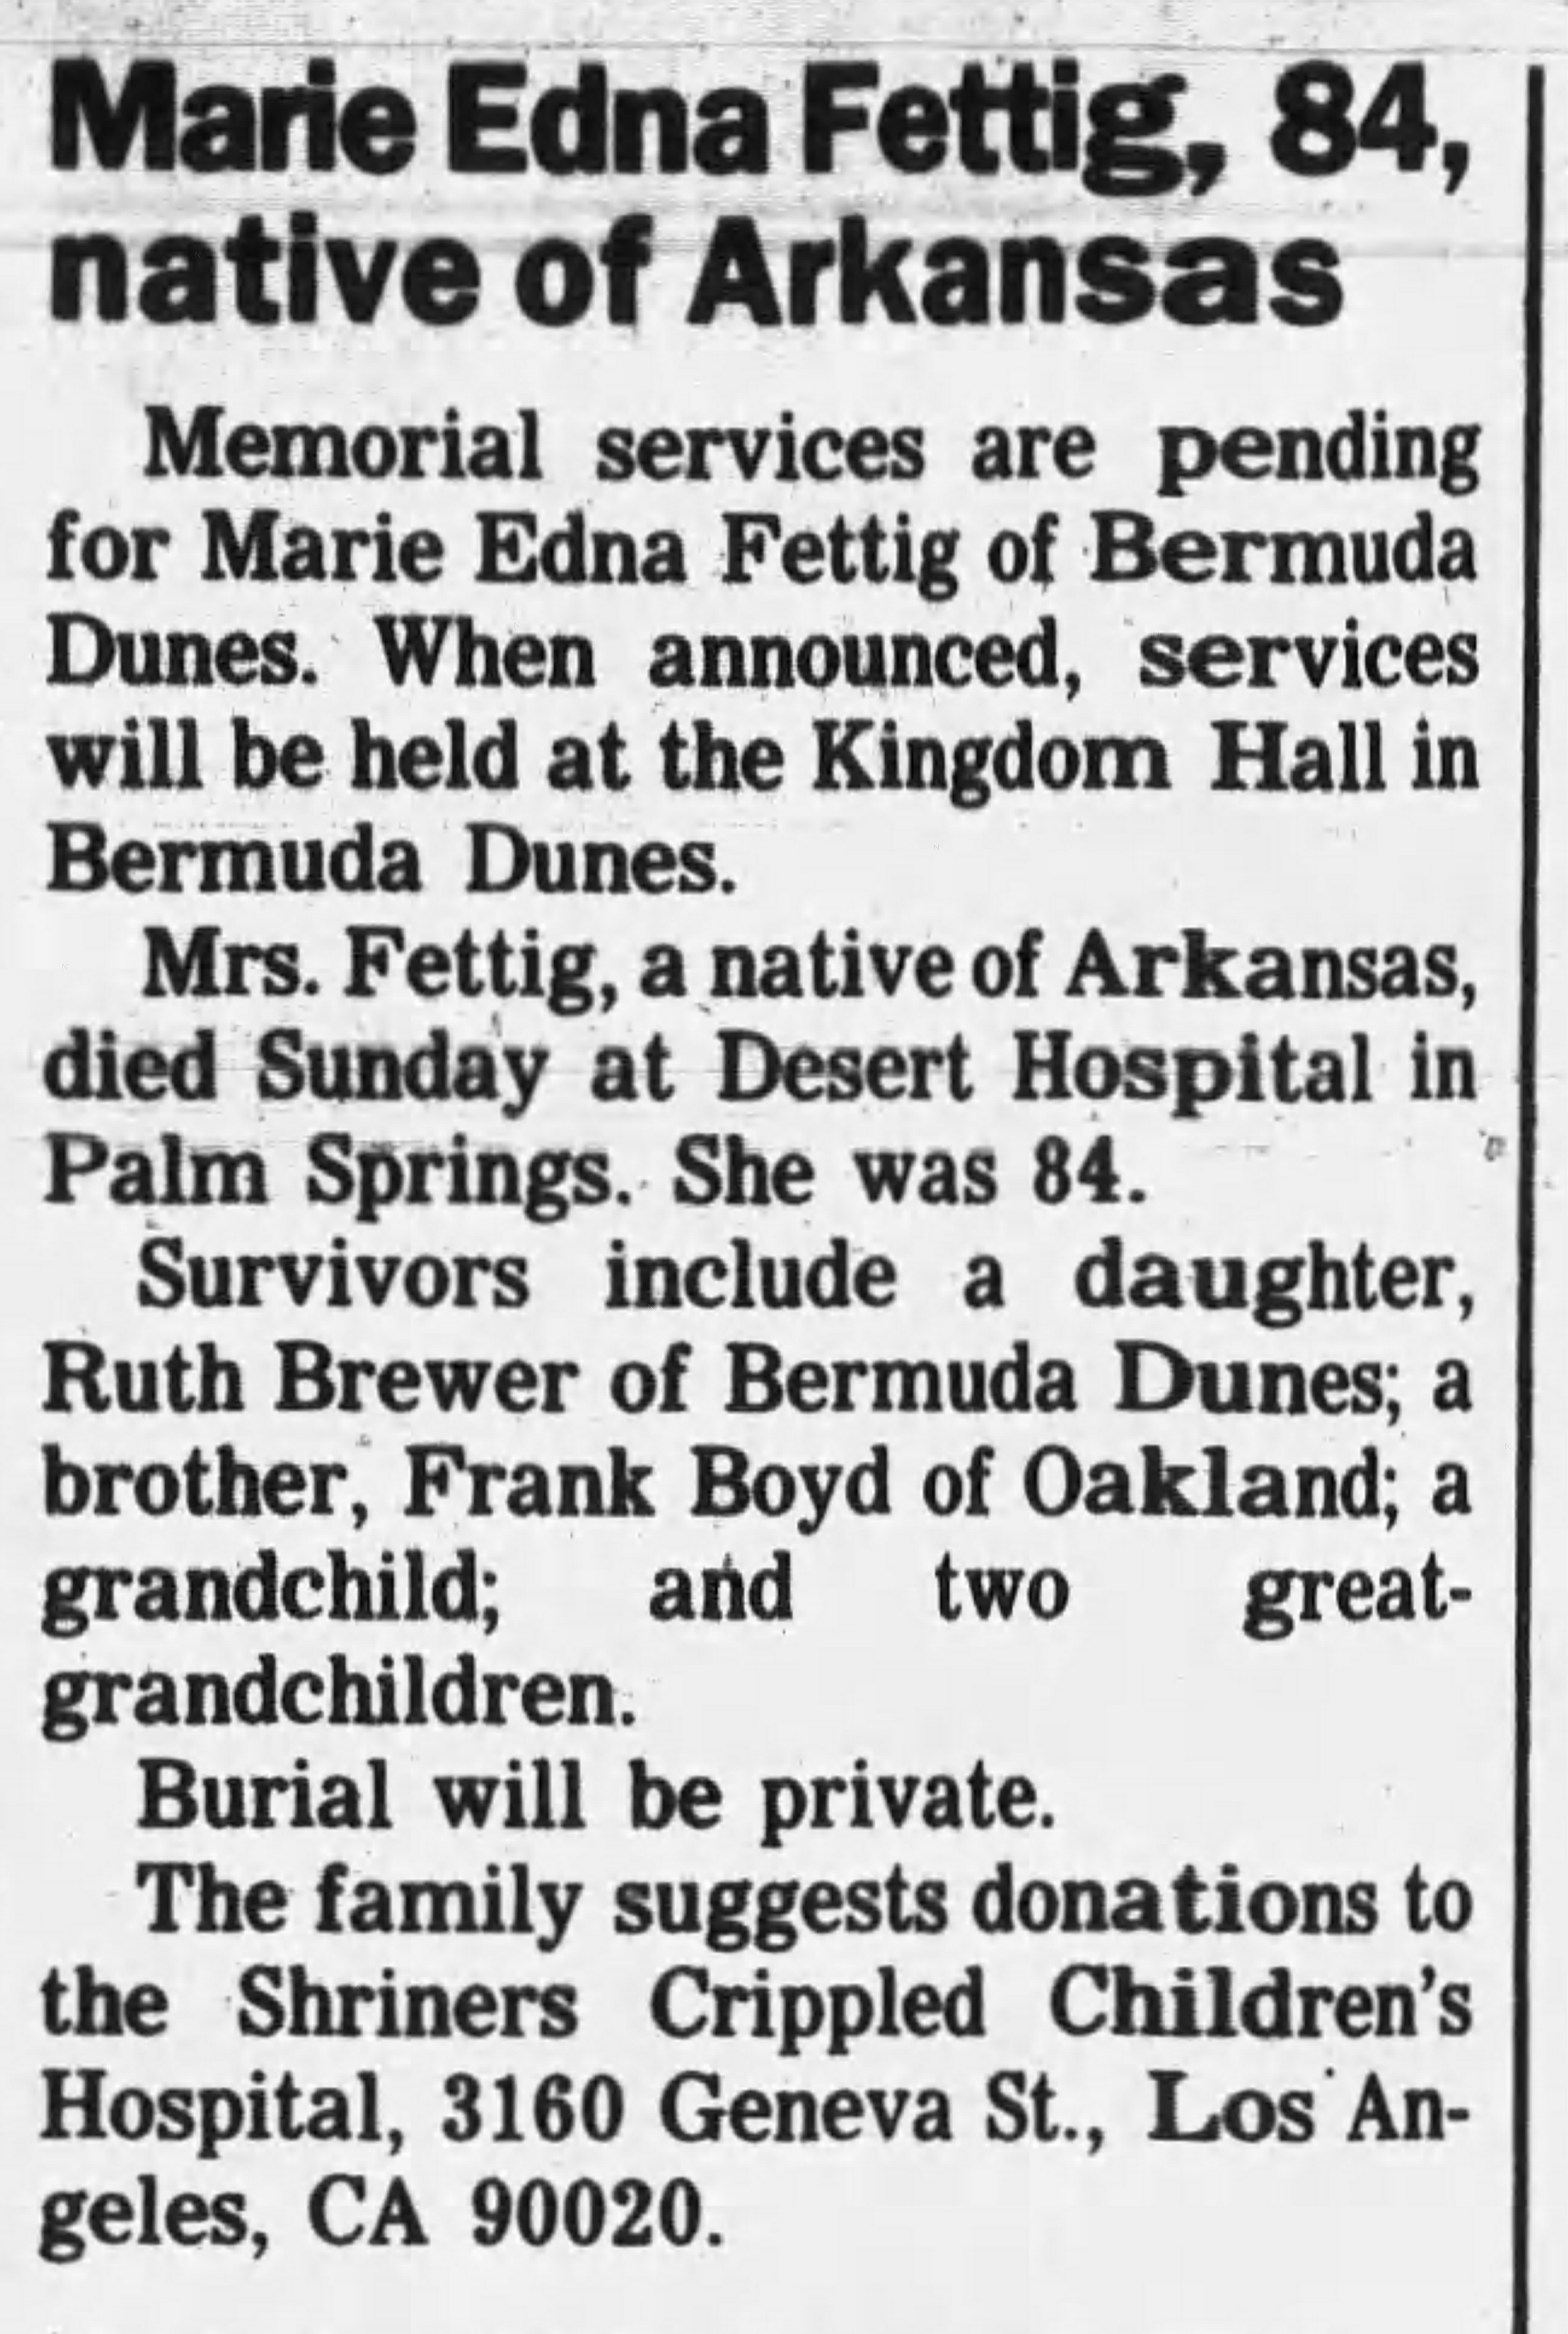 Article about memorial services for Marie Edna Fettig